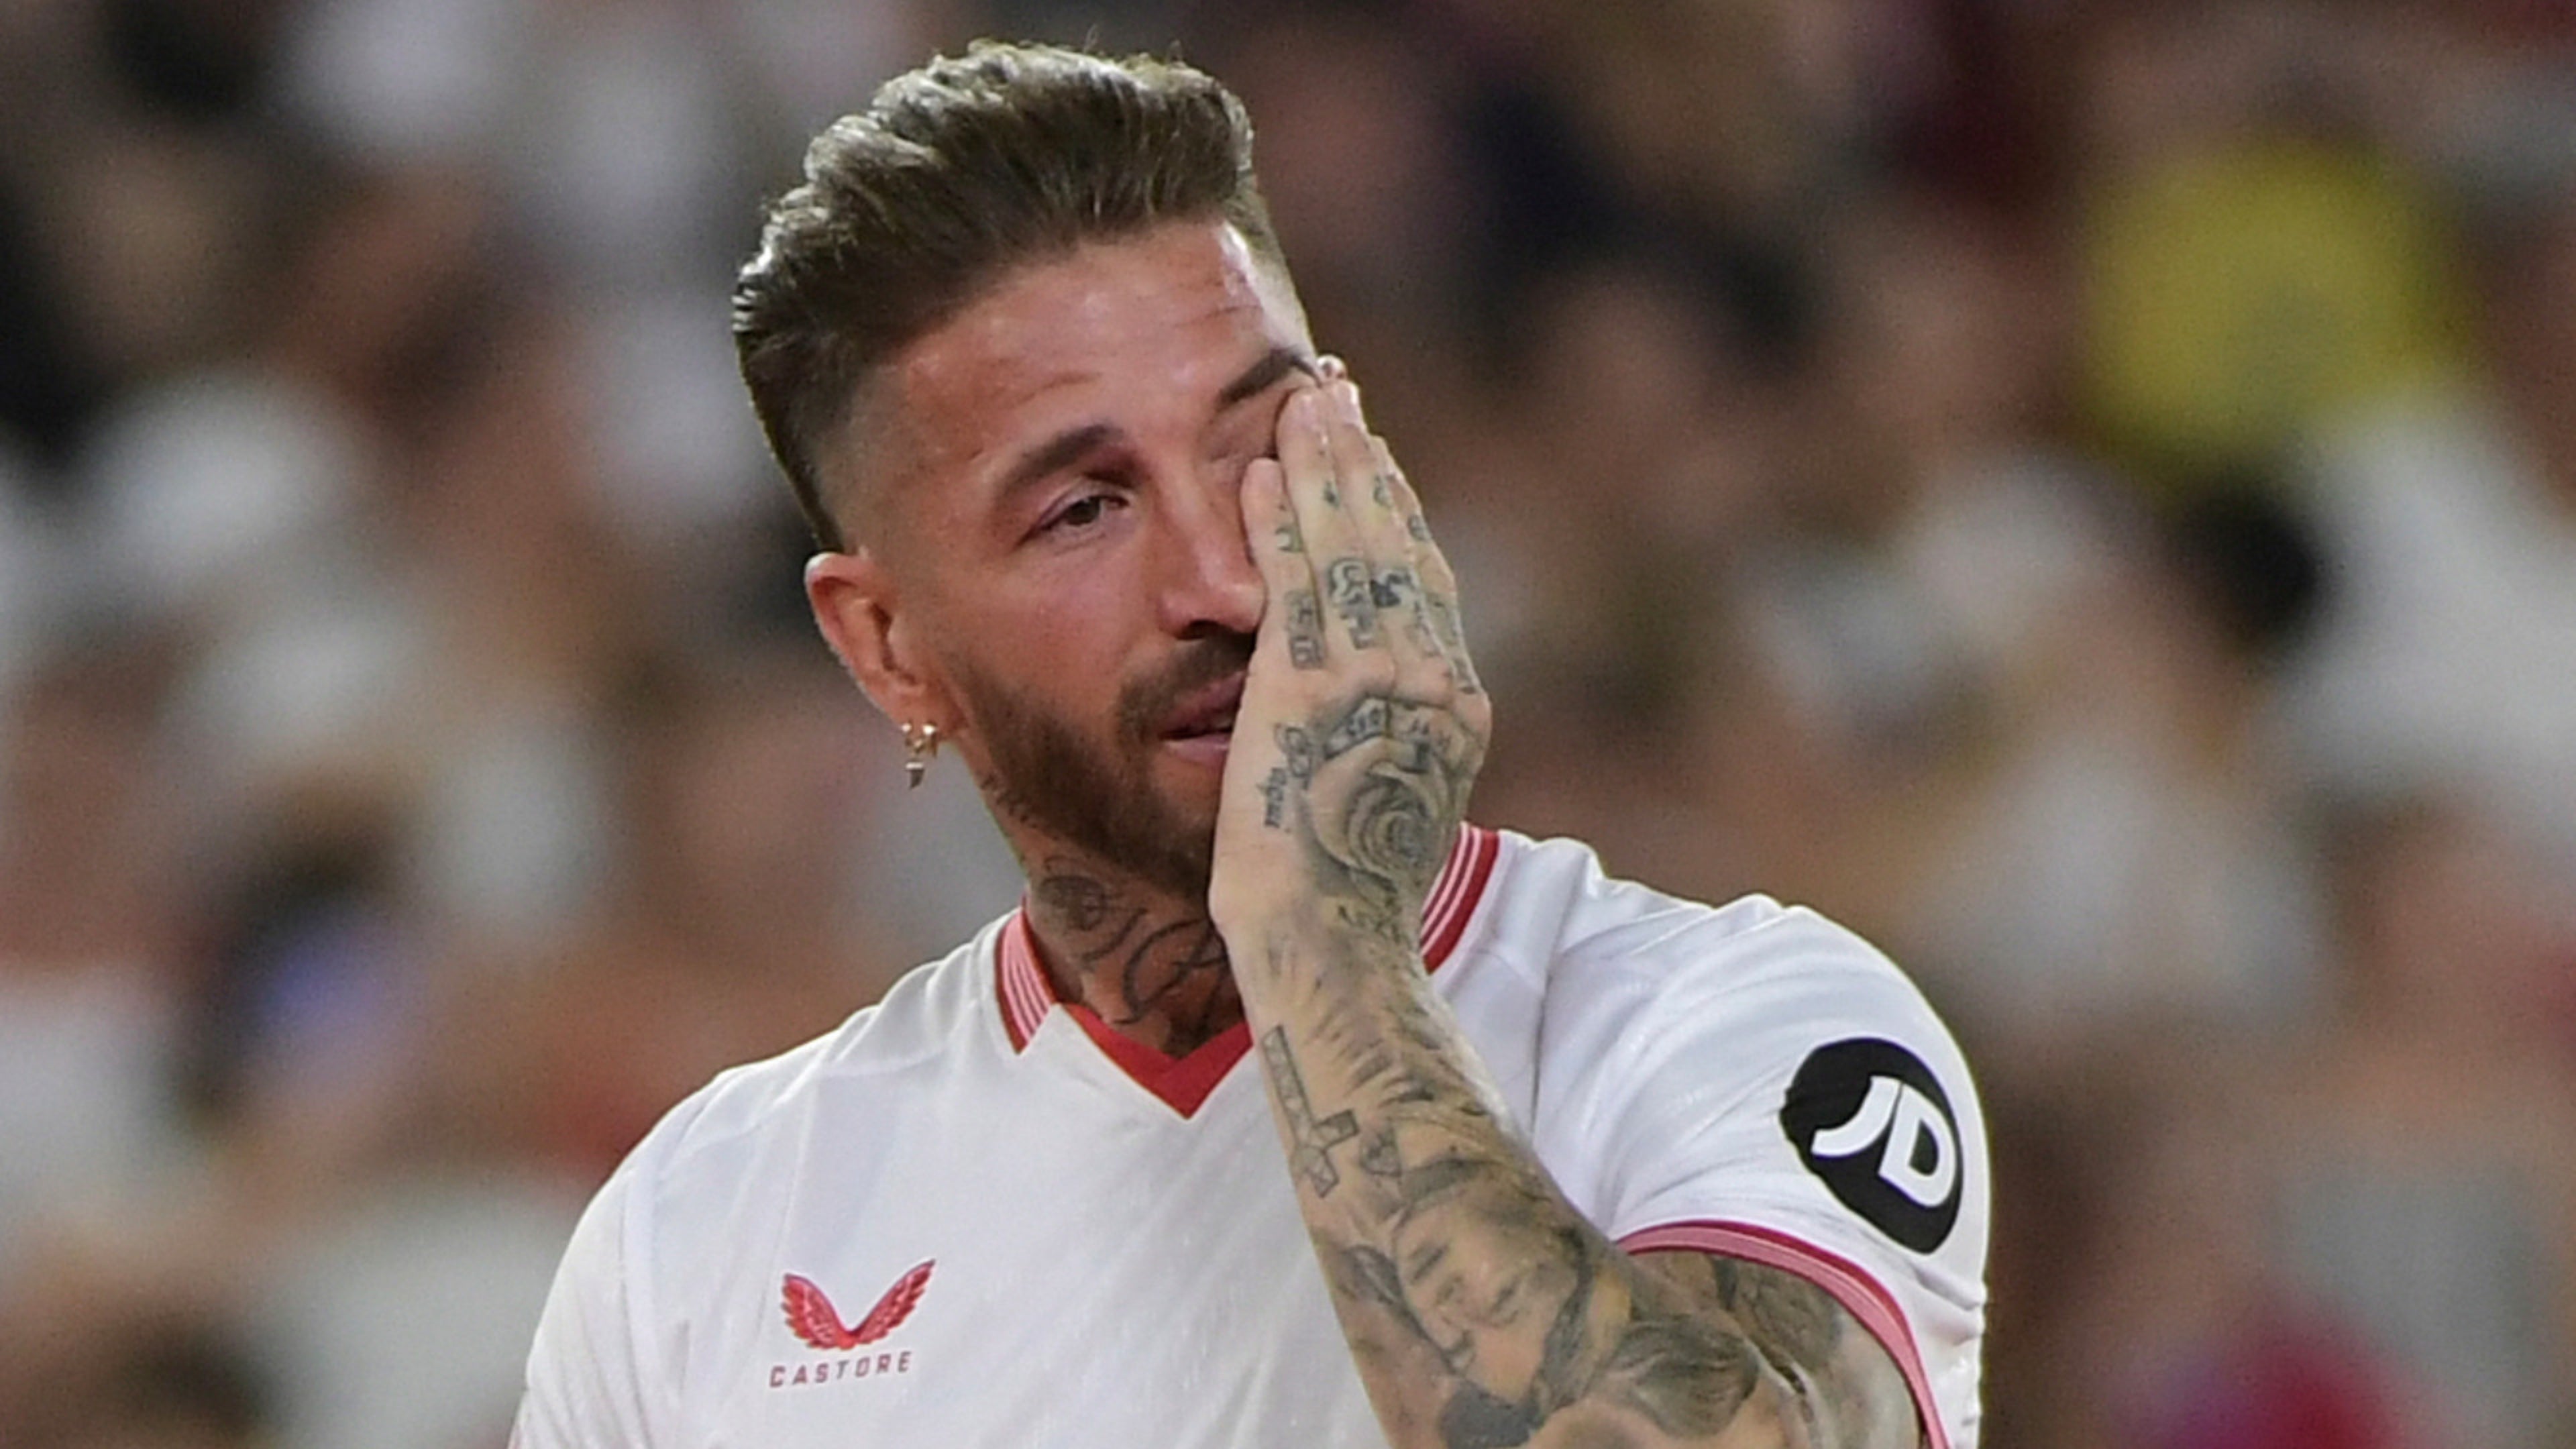 The cycle was over' - Sergio Ramos aims dig at PSG after making emotional  Sevilla return